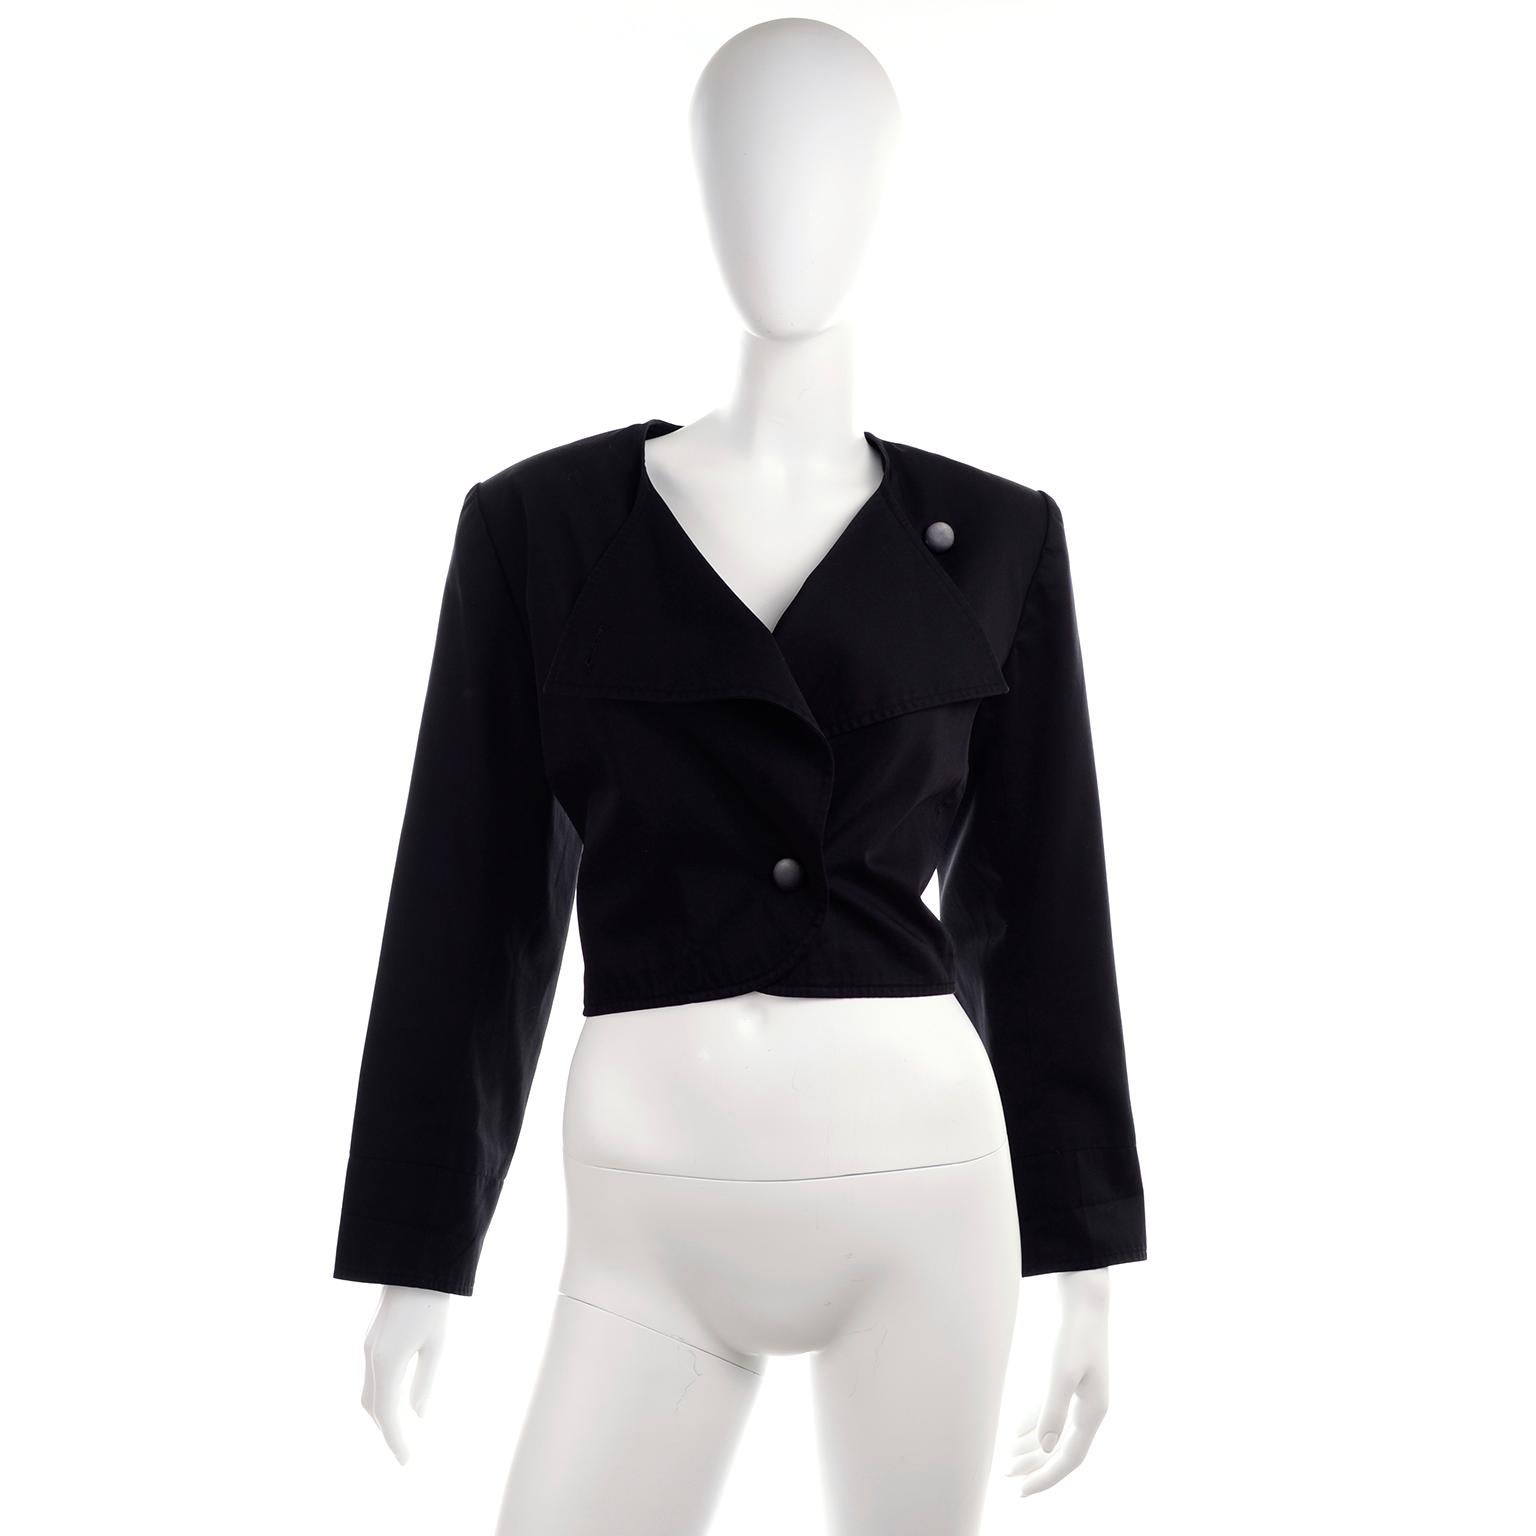 This is a great YSL vintage black long sleeve jacket with shoulder pads and front buttons.  The jacket is in excellent condition and was made in France. Labeled a French size 44 and includes the extra button sewn in side seam. Made in